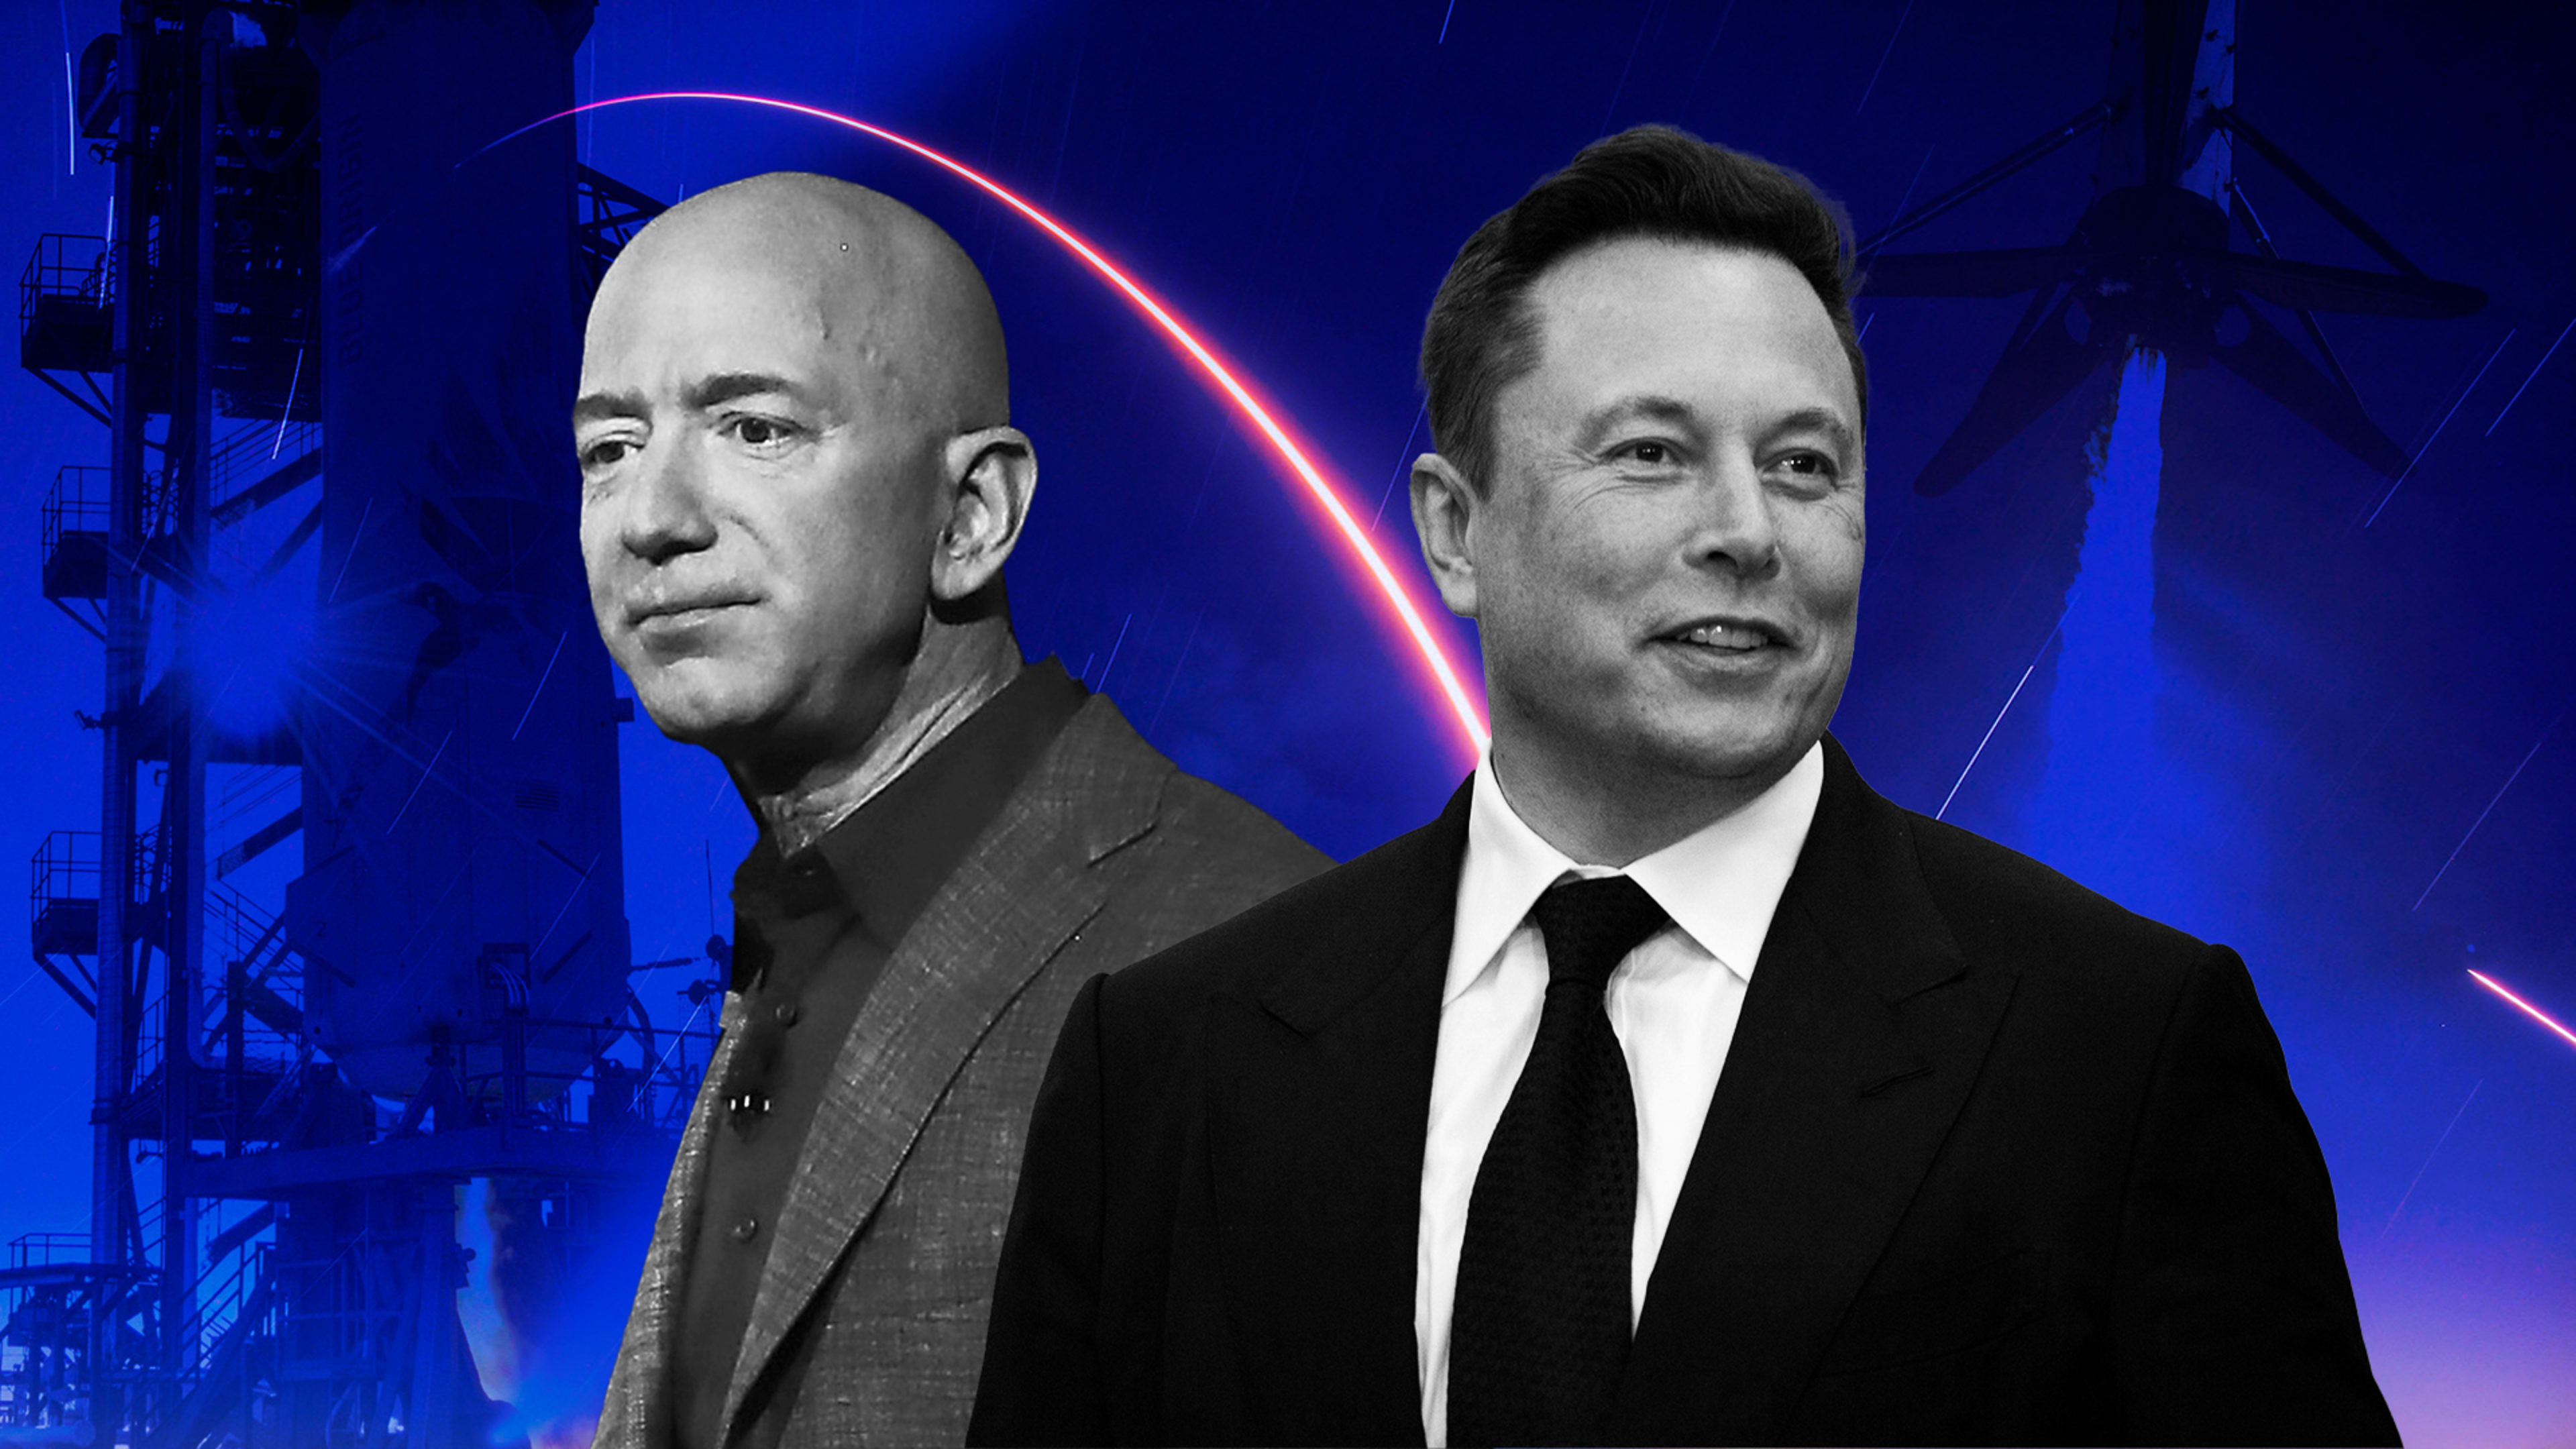 How Jeff Bezos and Elon Musk are ushering in a new era of space startups